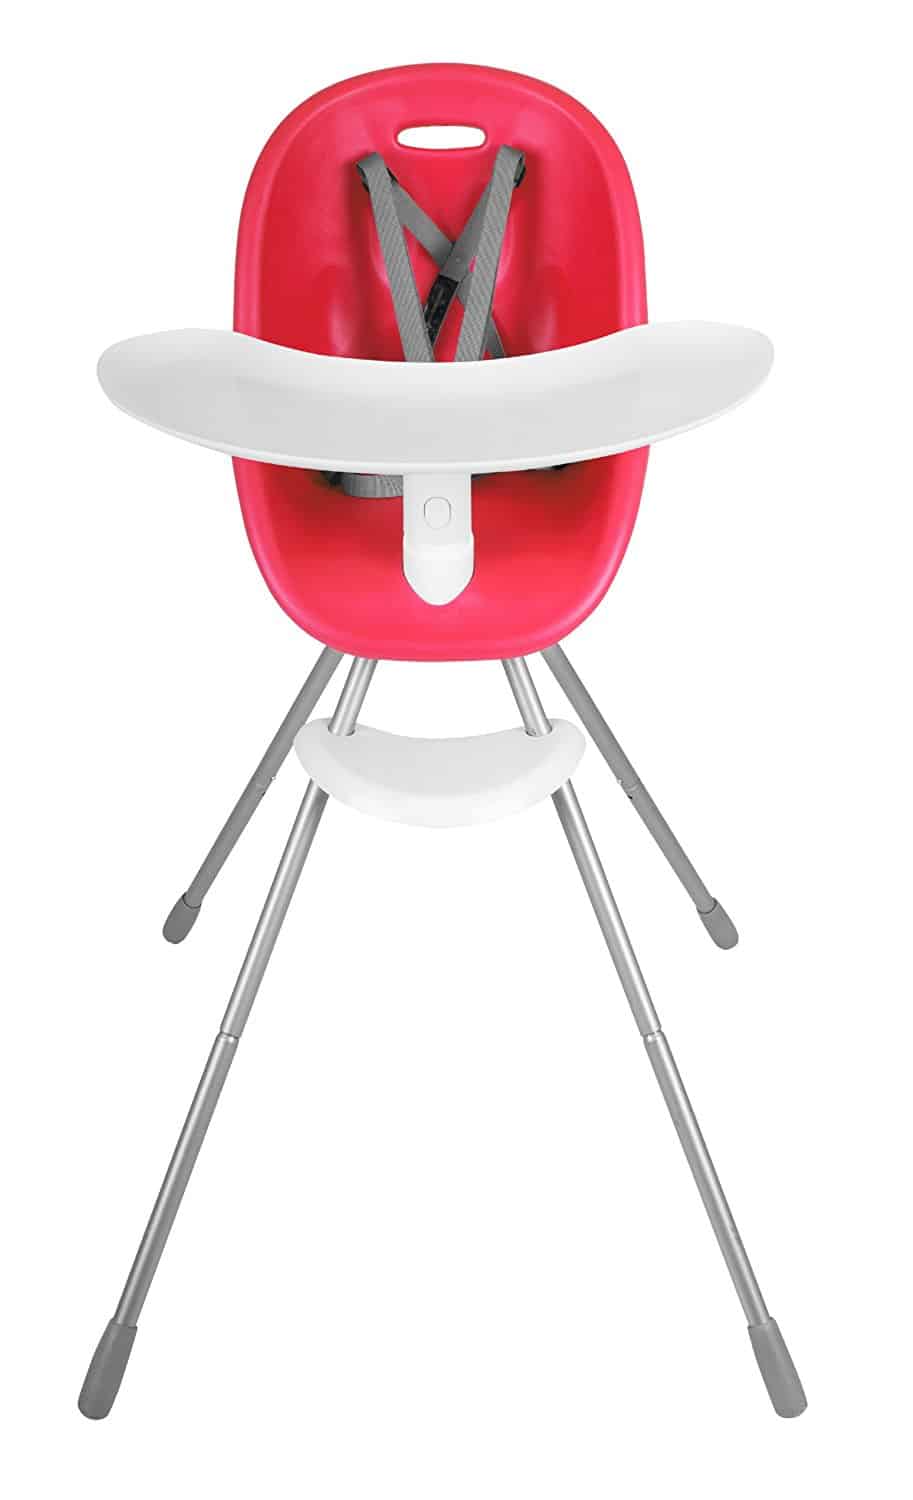 Phil & Ted's Poppy high chair